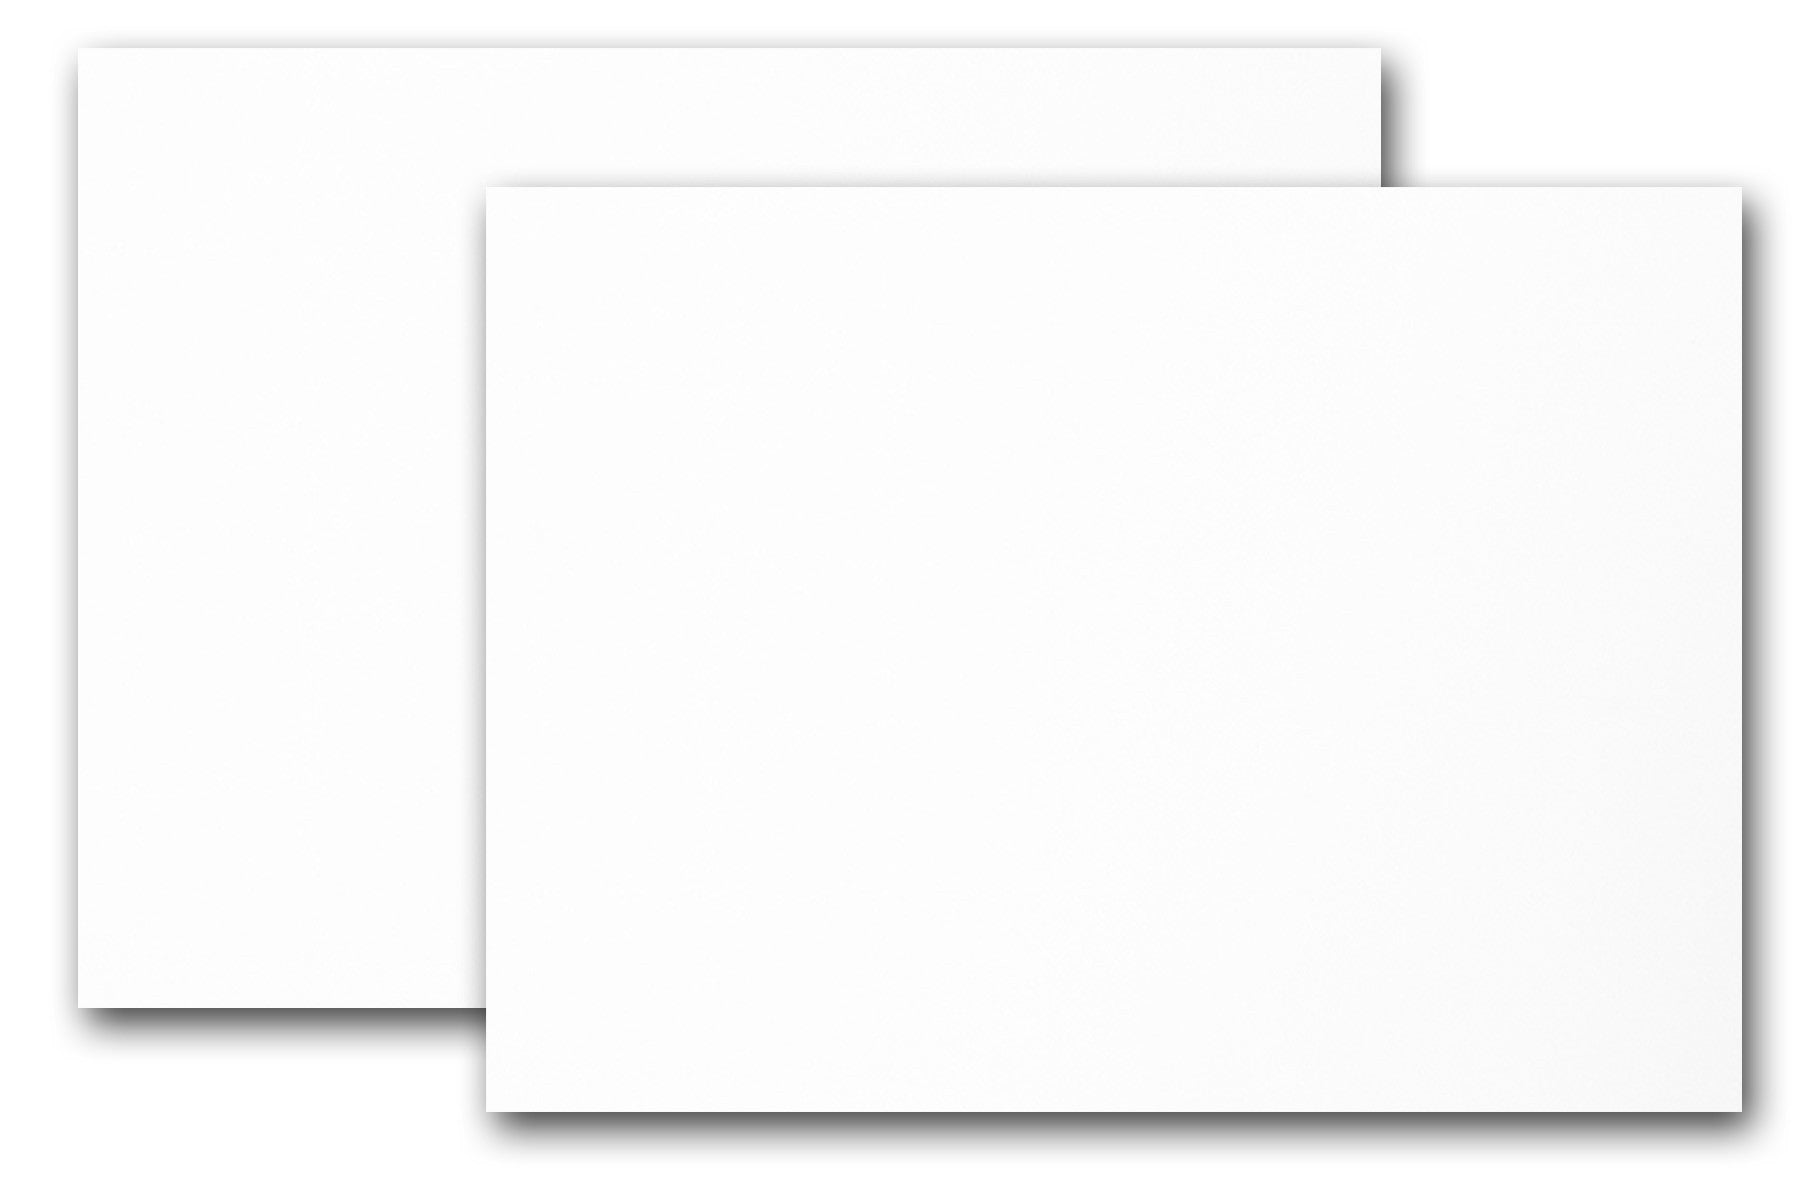 Cougar White Smooth CardStock 8.5x11 - 50 sheets